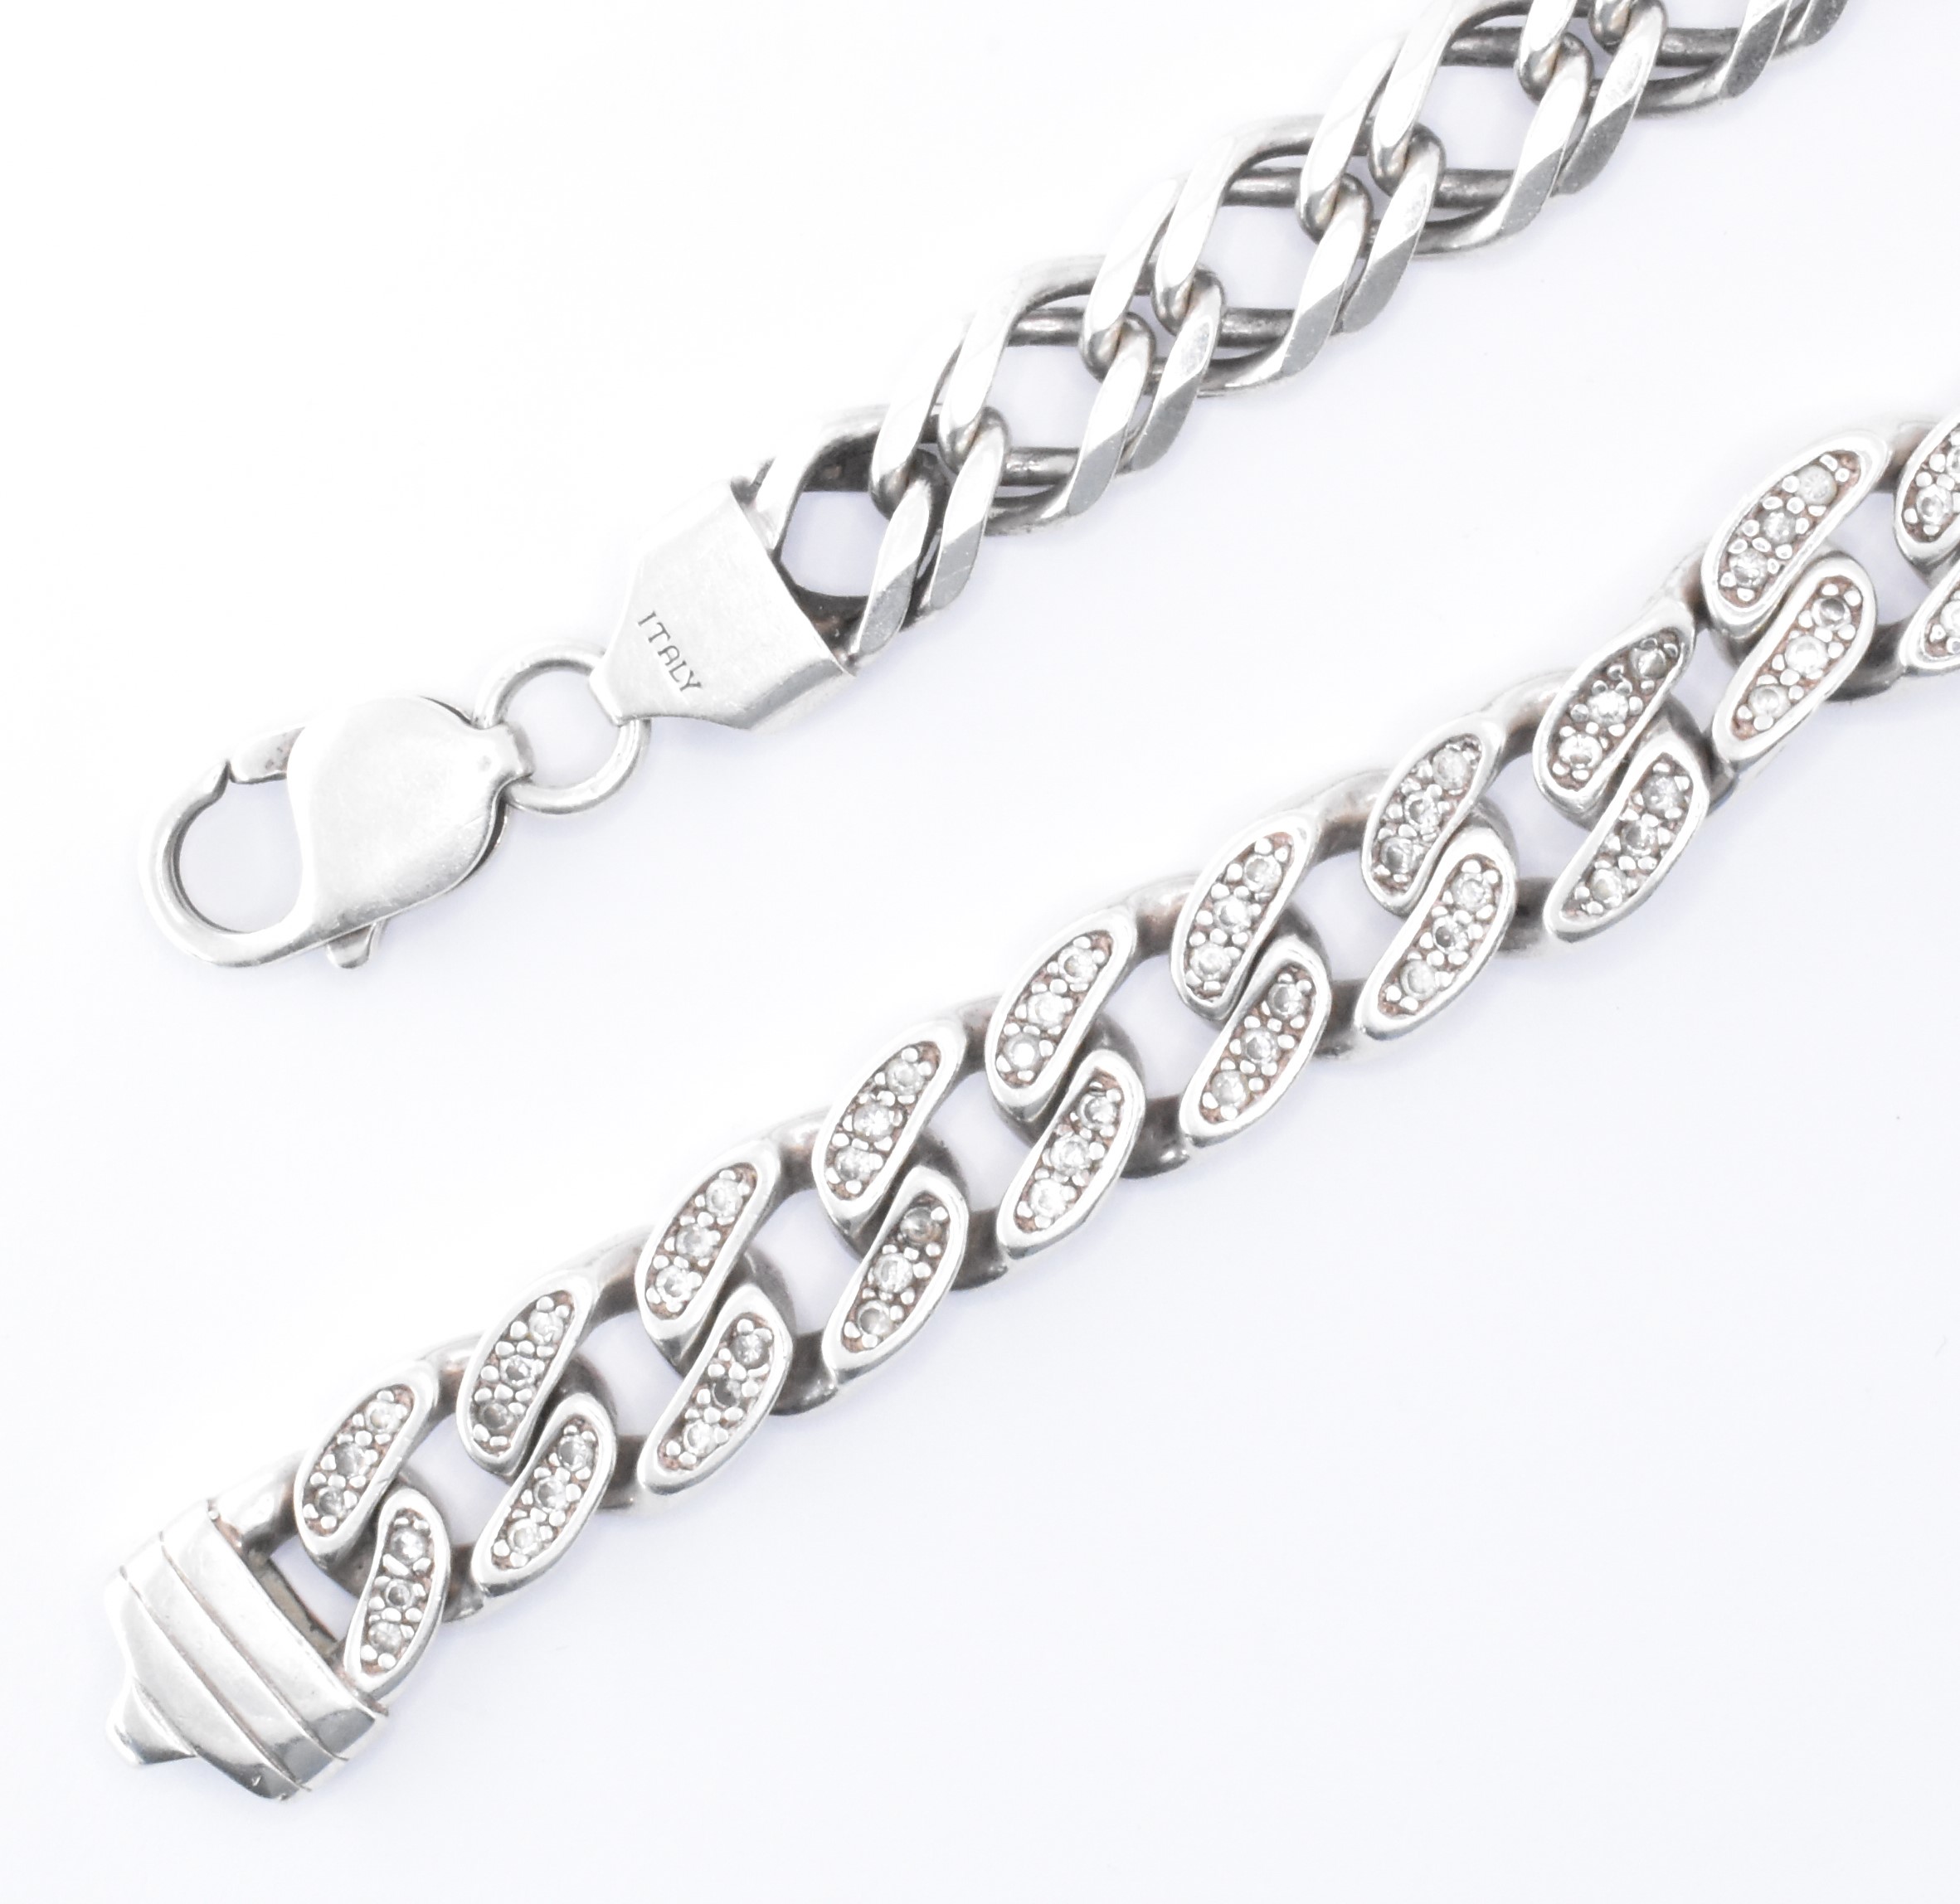 PAIR OF SILVER CHAIN BRACELETS - Image 4 of 5